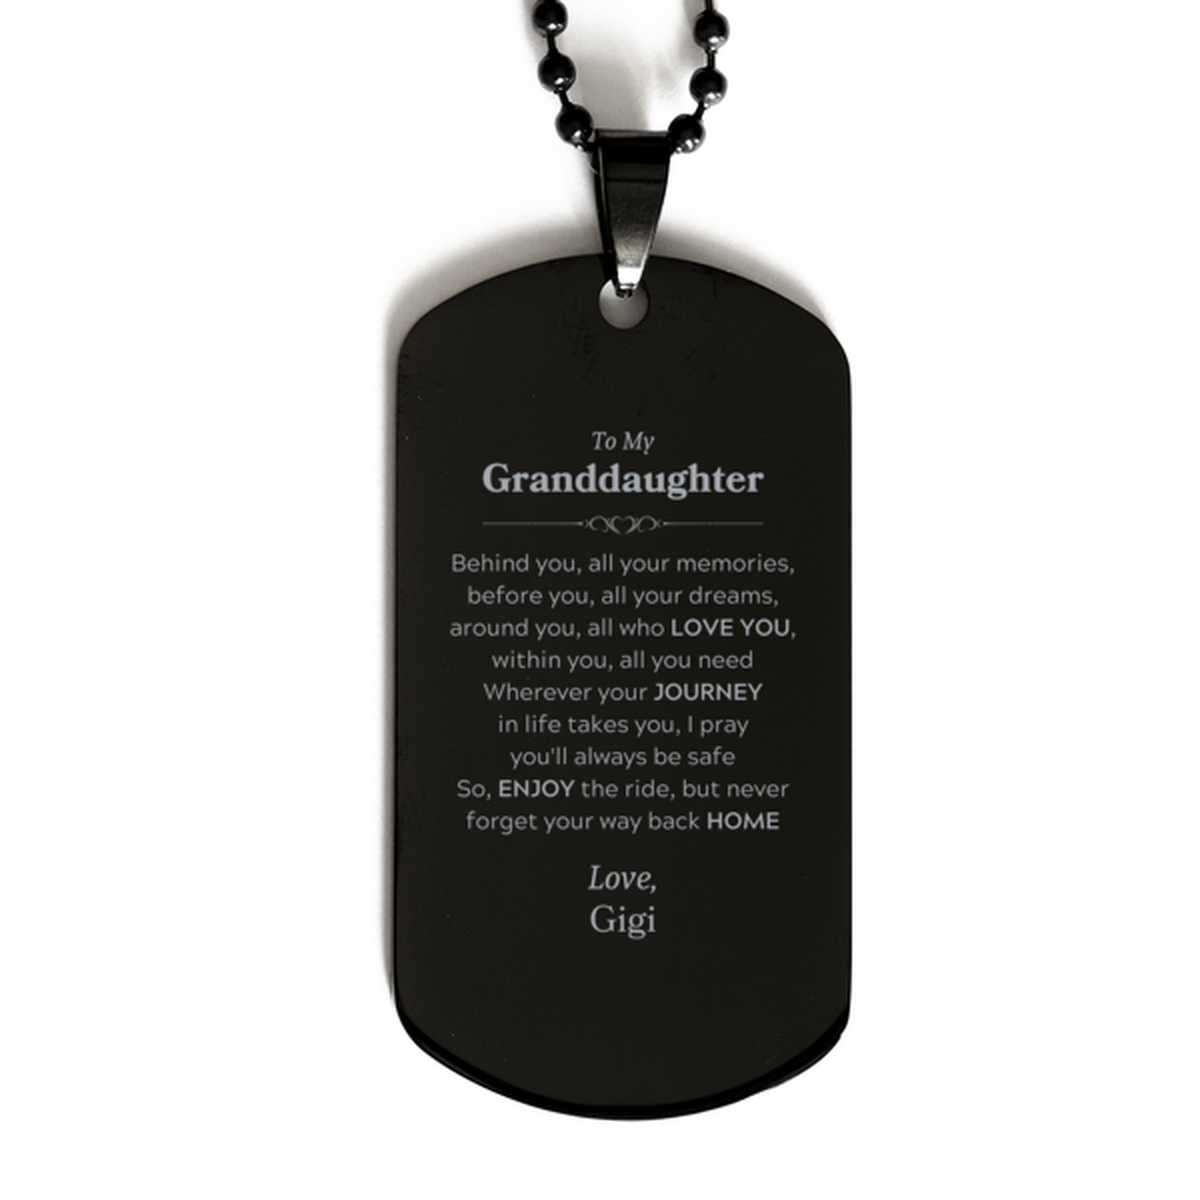 To My Granddaughter Graduation Gifts from Gigi, Granddaughter Black Dog Tag Christmas Birthday Gifts for Granddaughter Behind you, all your memories, before you, all your dreams. Love, Gigi